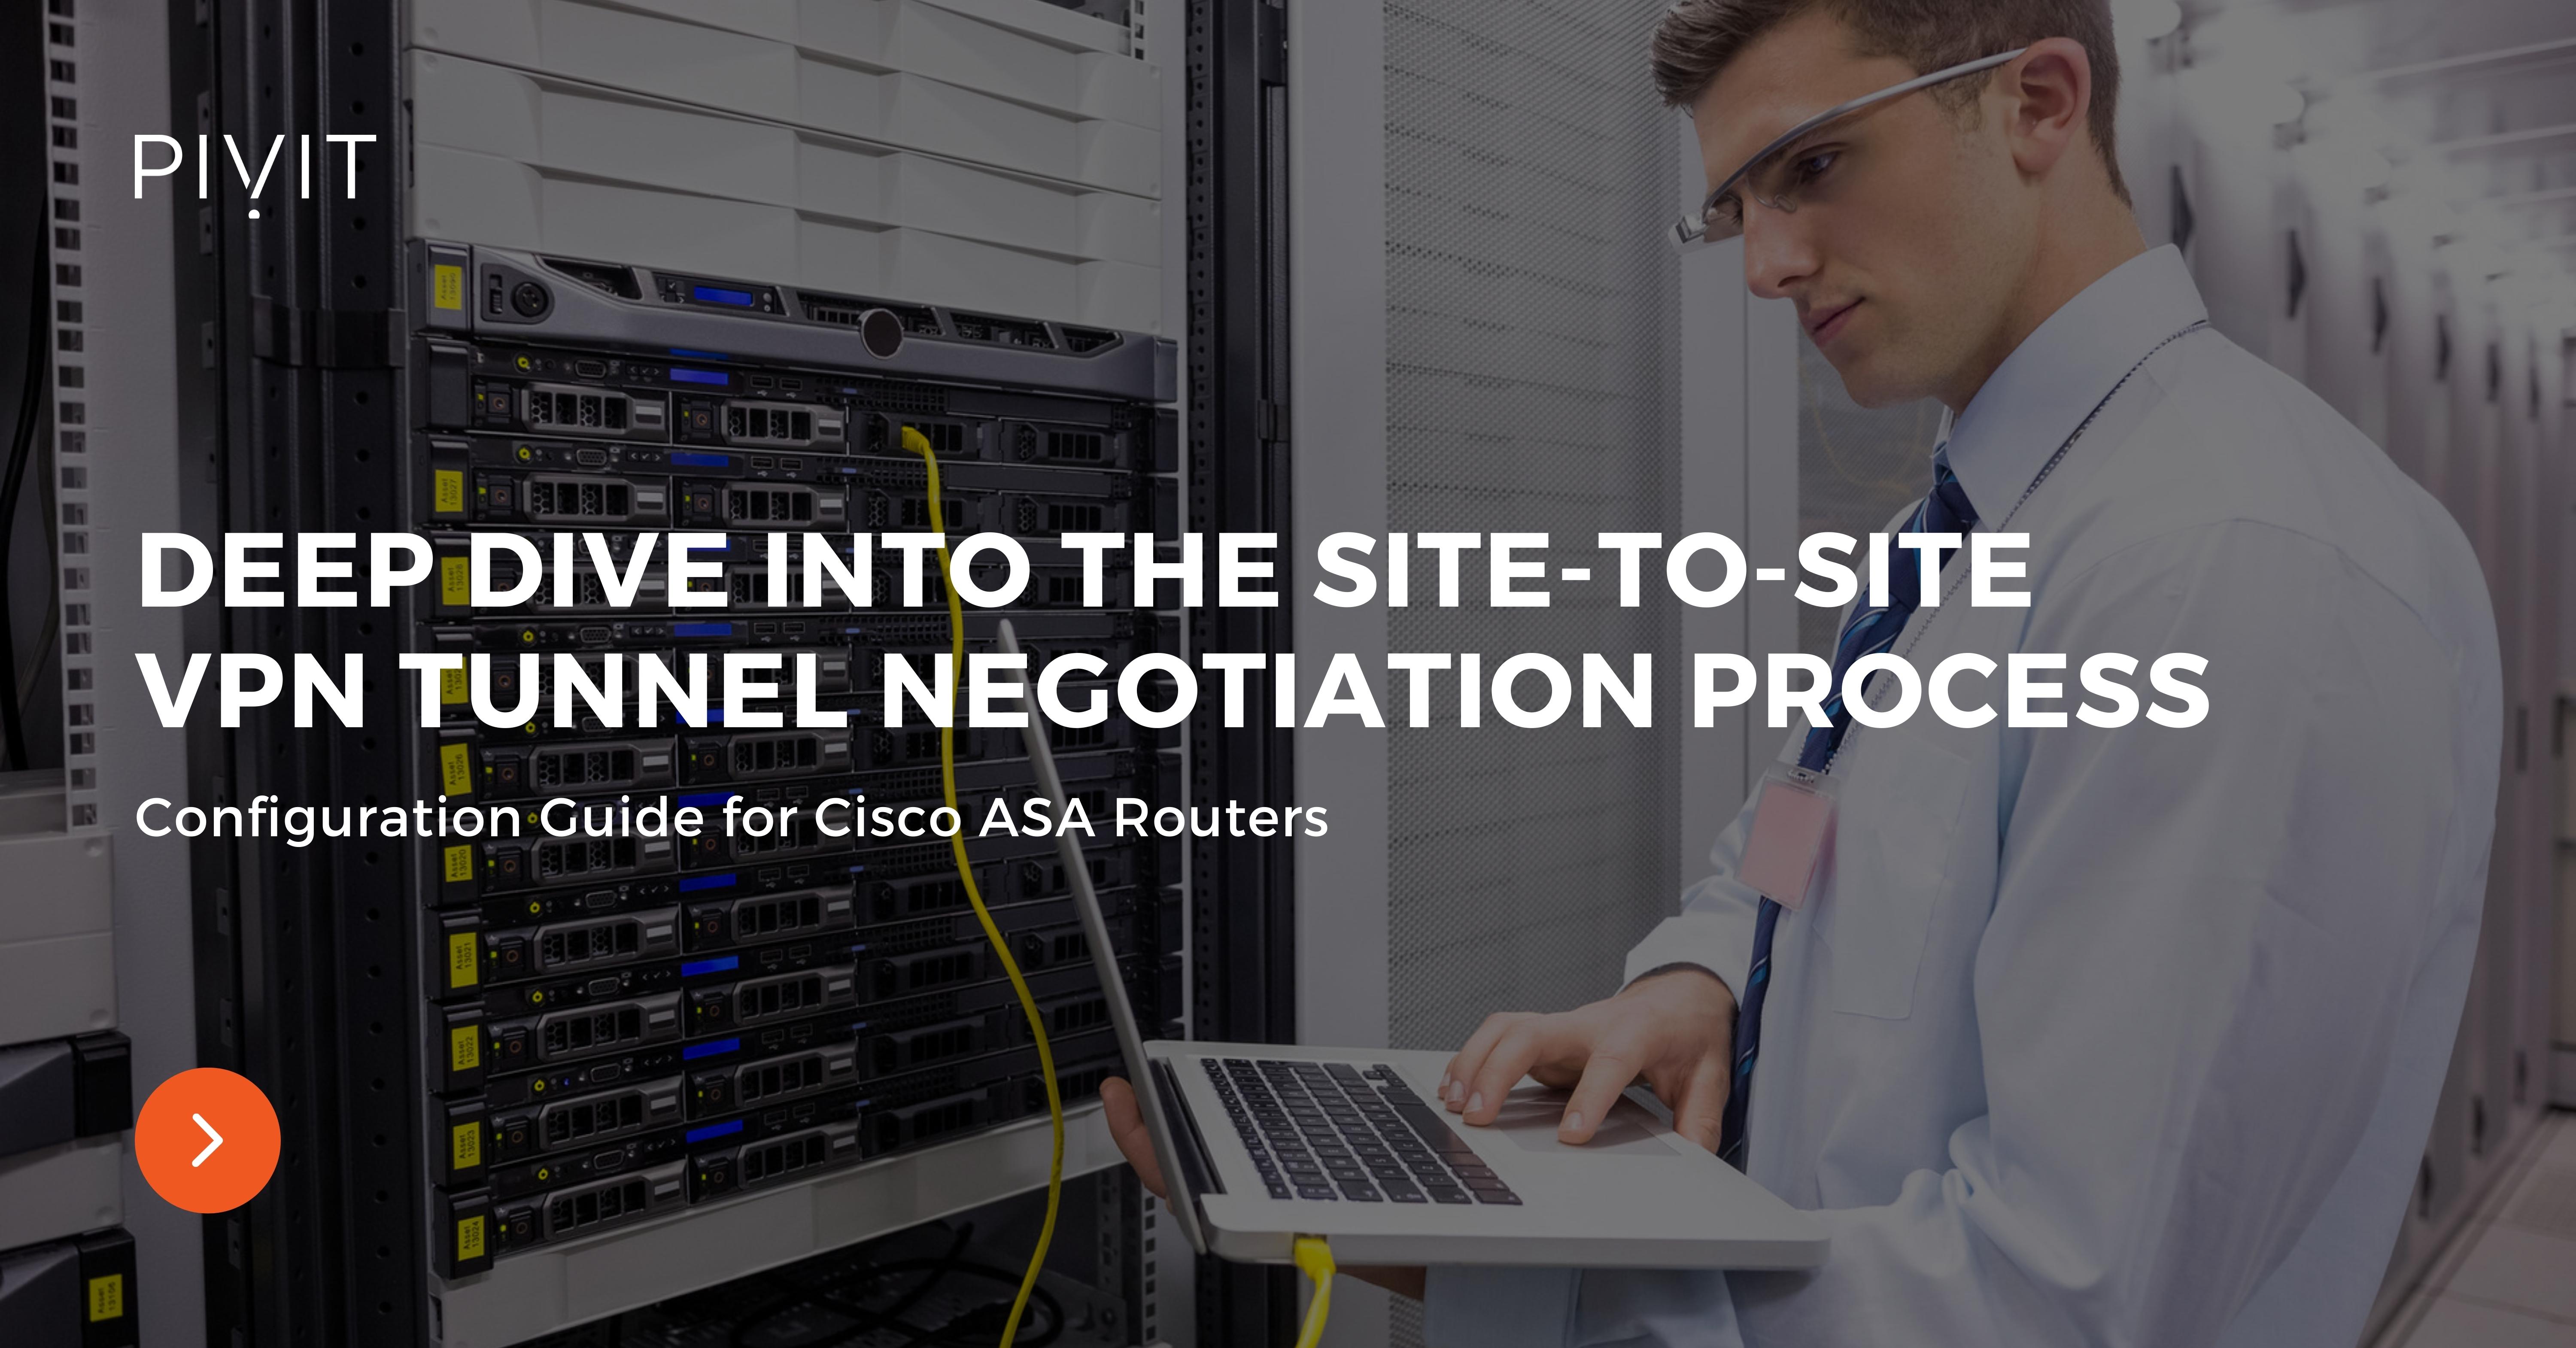 Deep Dive into the Site-to-Site VPN Tunnel Negotiation Process - Configuration Guide for Cisco ASA Routers